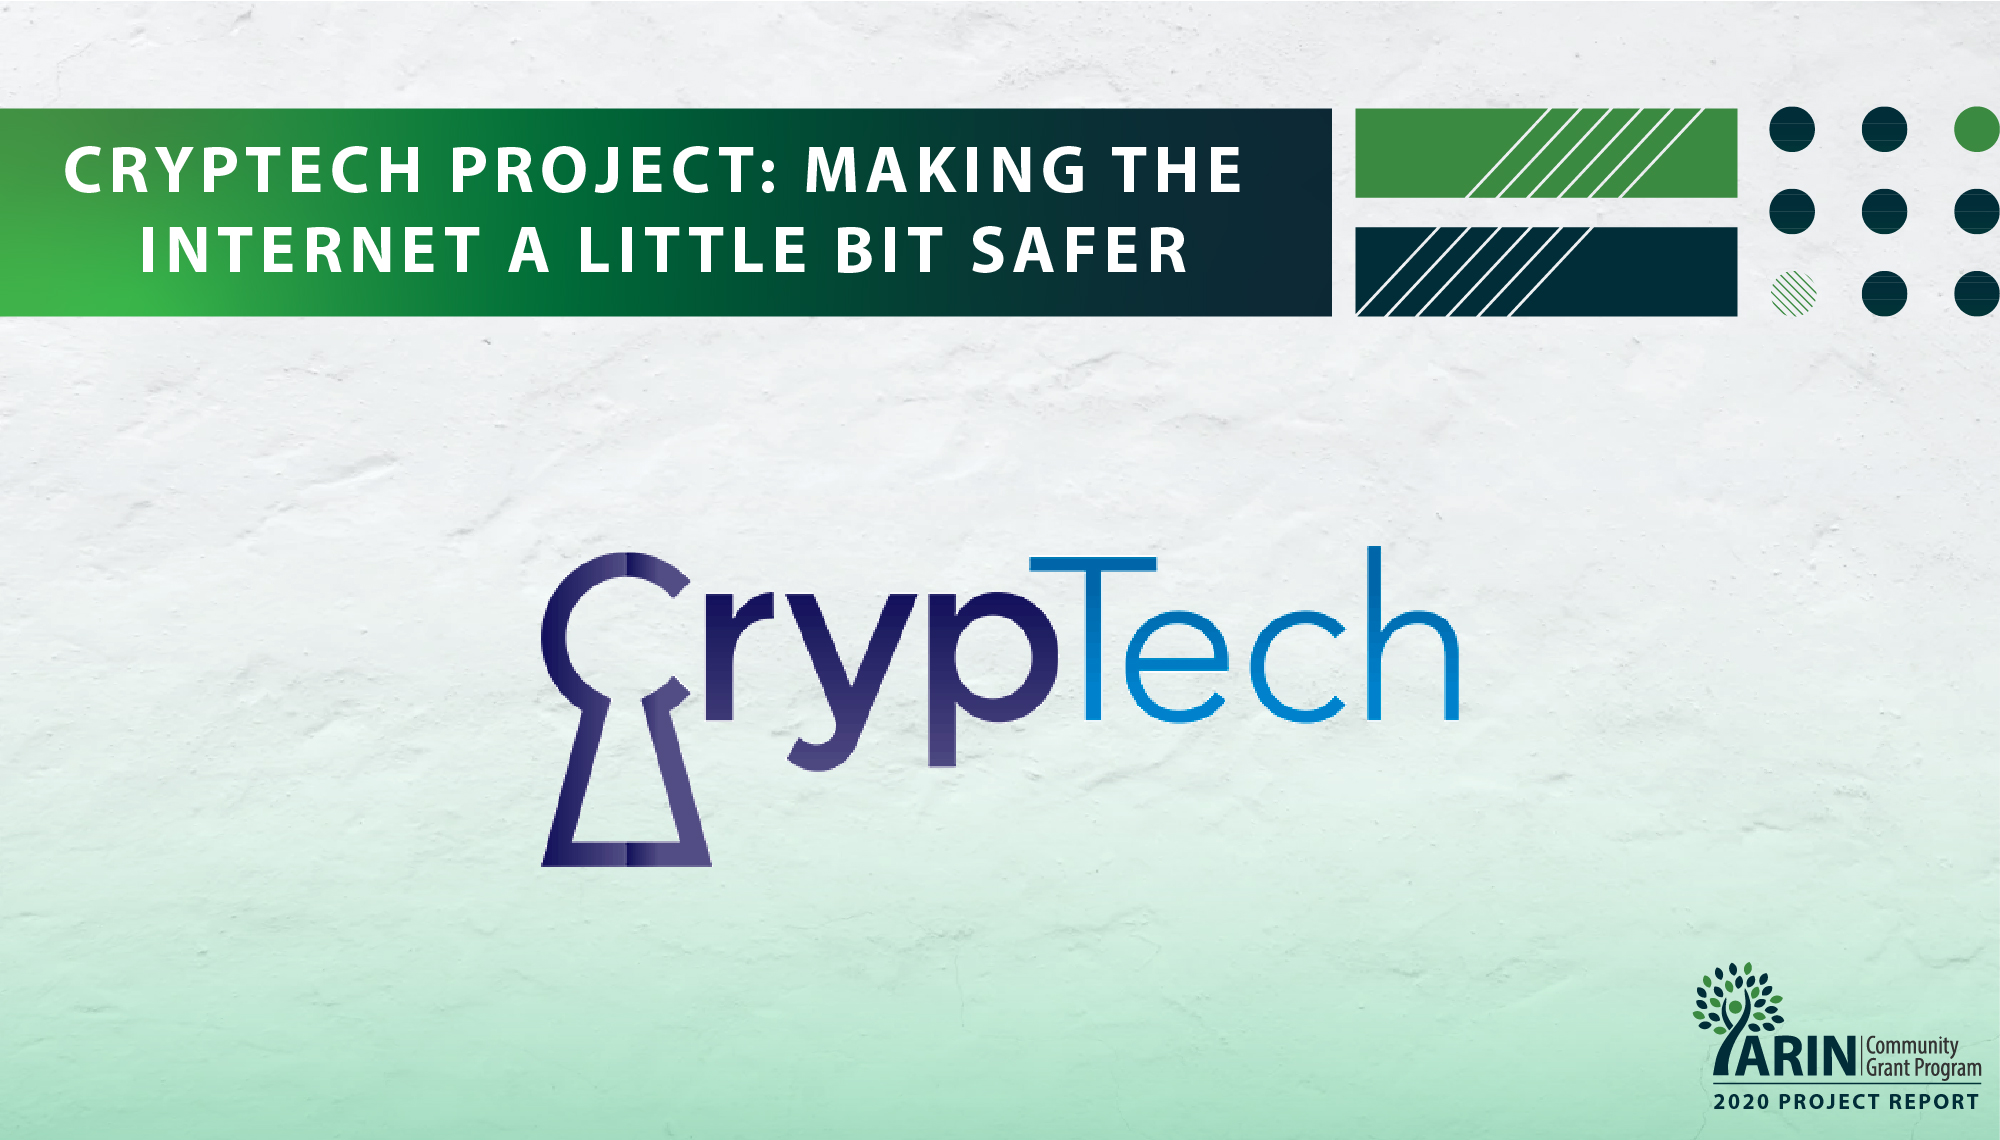 CrypTech Project: Making the Internet a Little Bit Safer